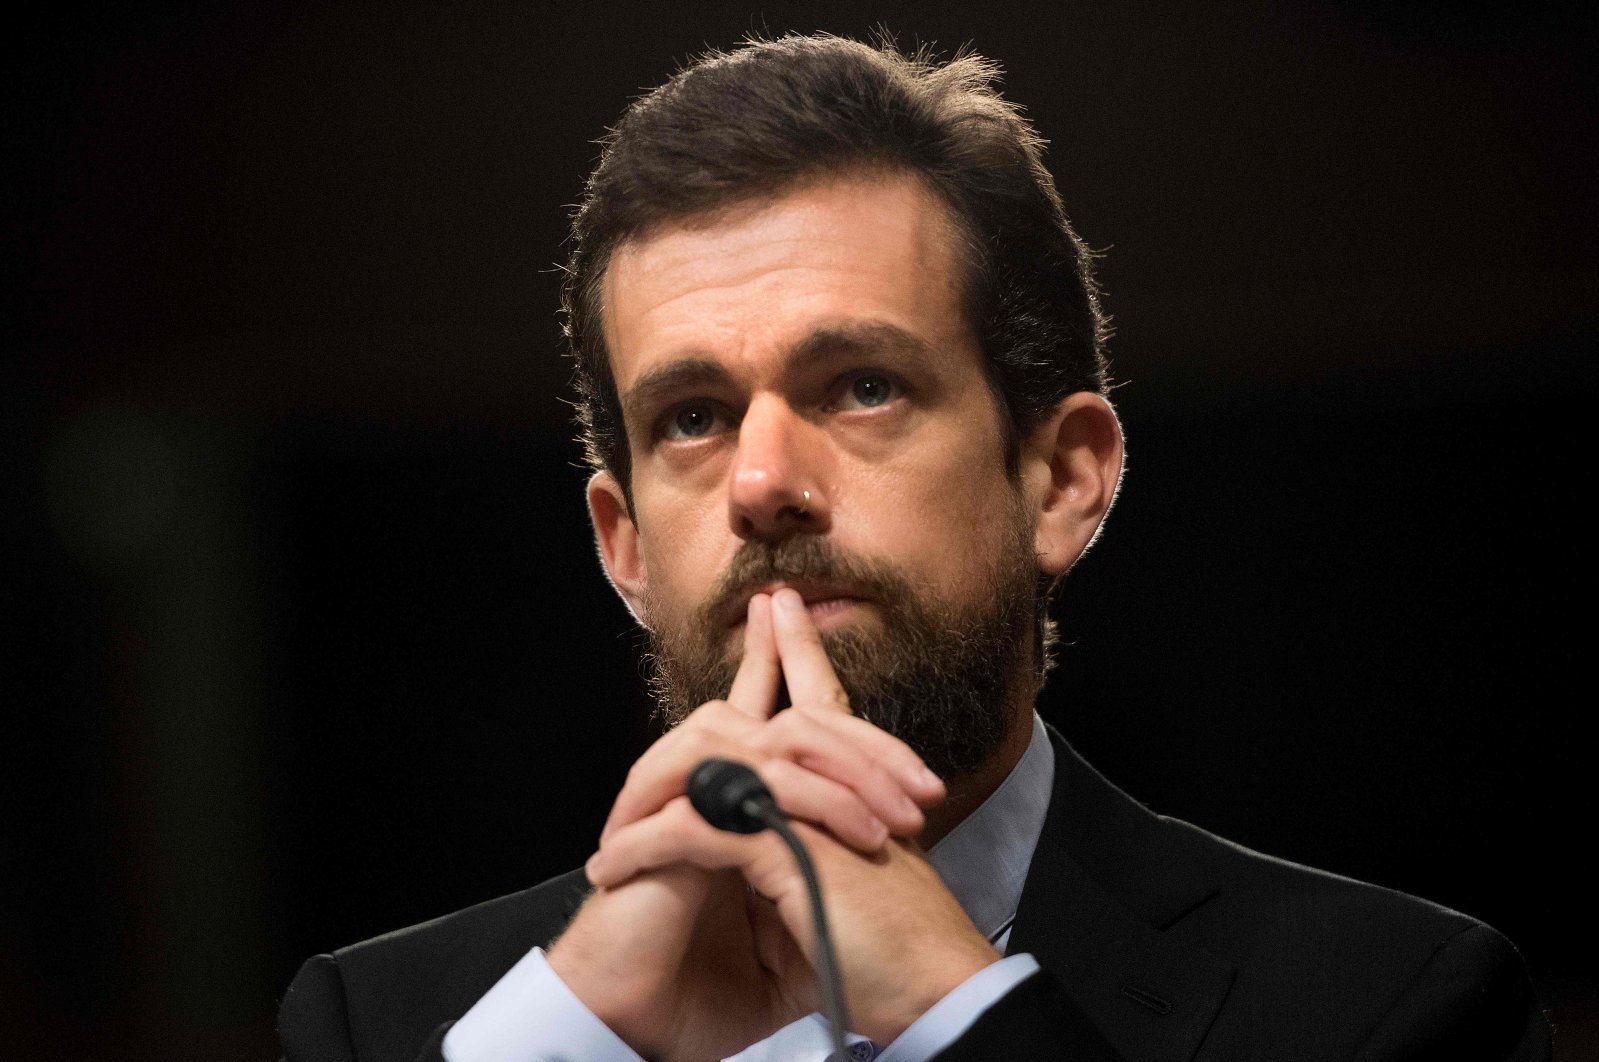 CEO of Twitter Jack Dorsey testifies before the Senate Intelligence Committee on Capitol Hill in Washington, D.C., Sept. 5, 2018. (AFP Photo)